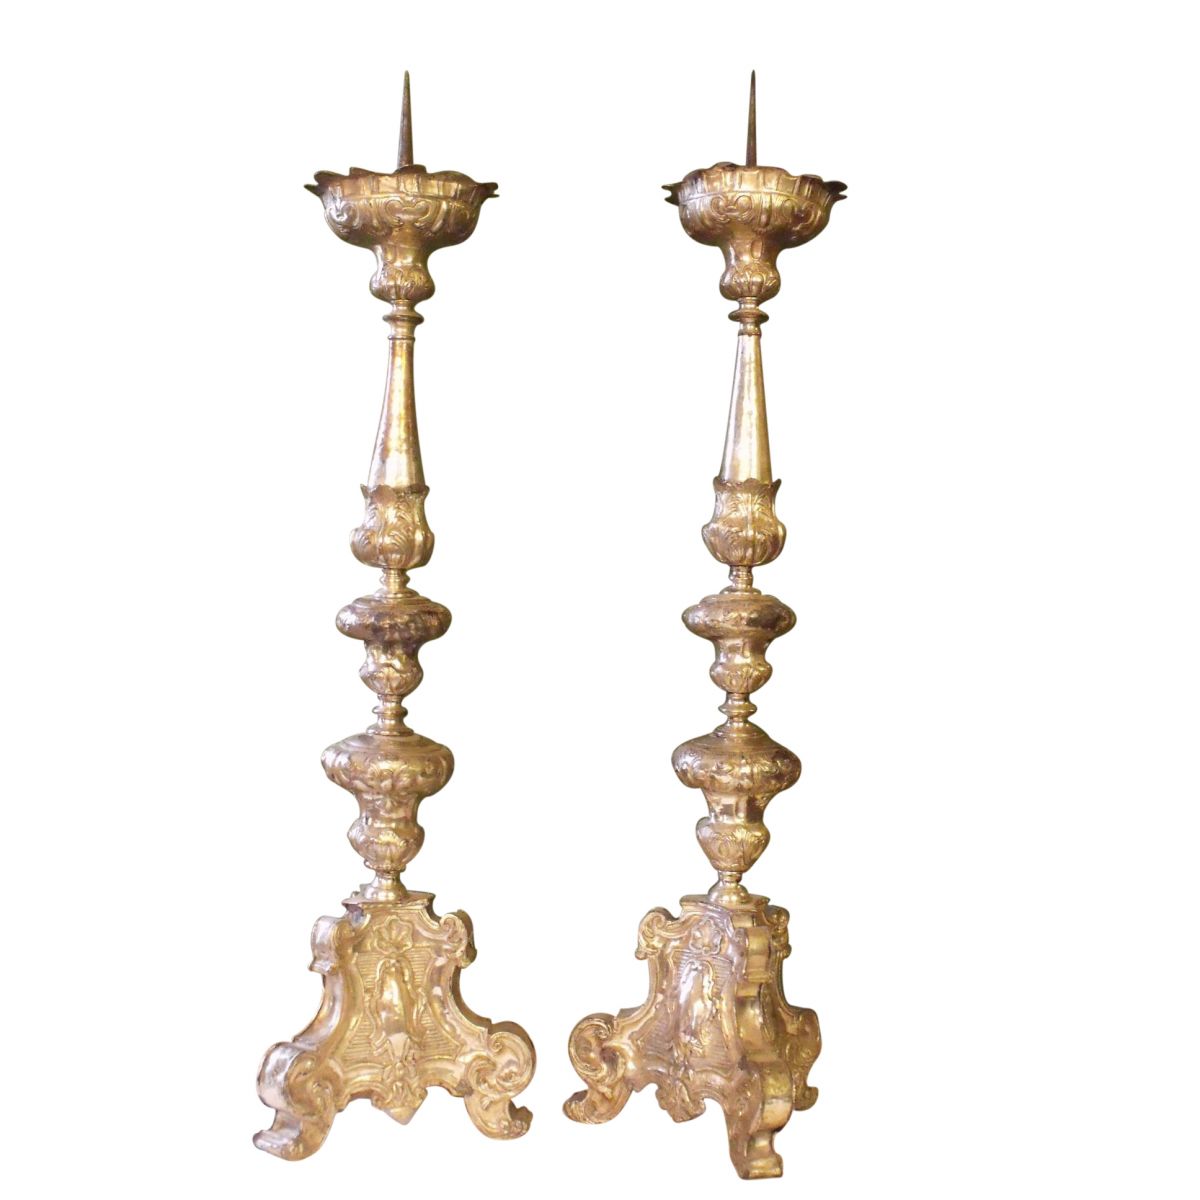 A pair of late baroque silvered brass altar candlesticks, first